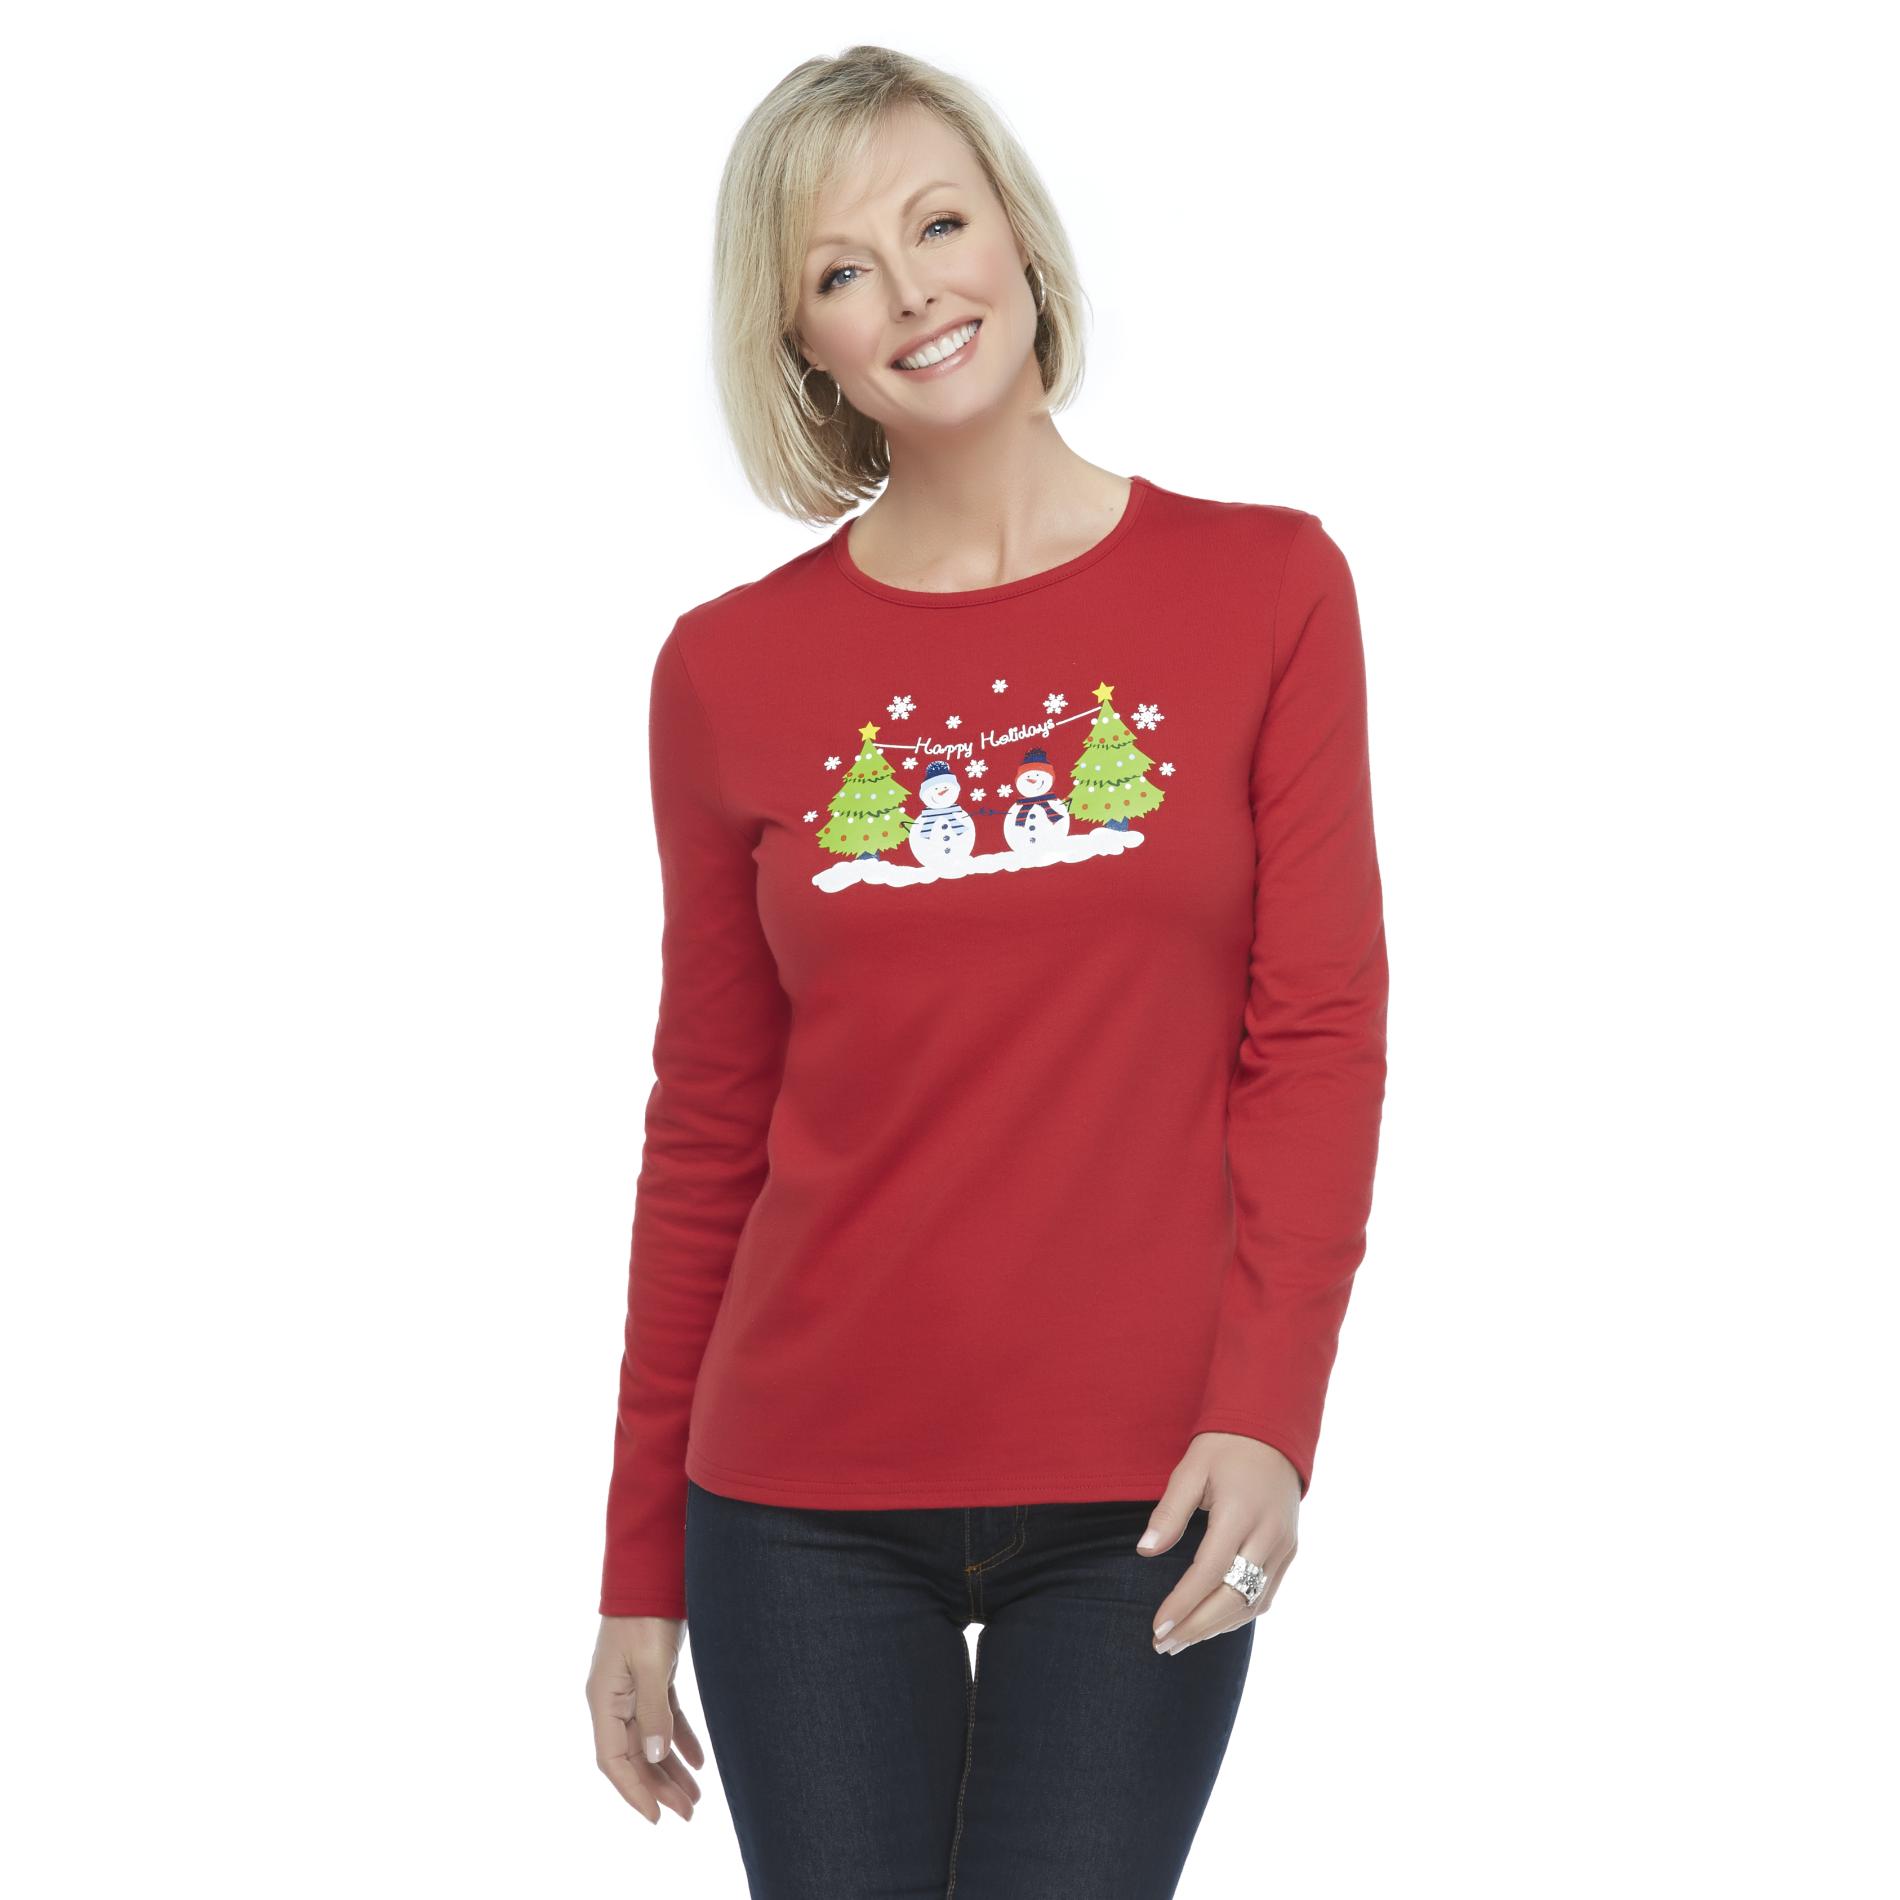 Holiday Editions Women's Graphic Top - Snowmen